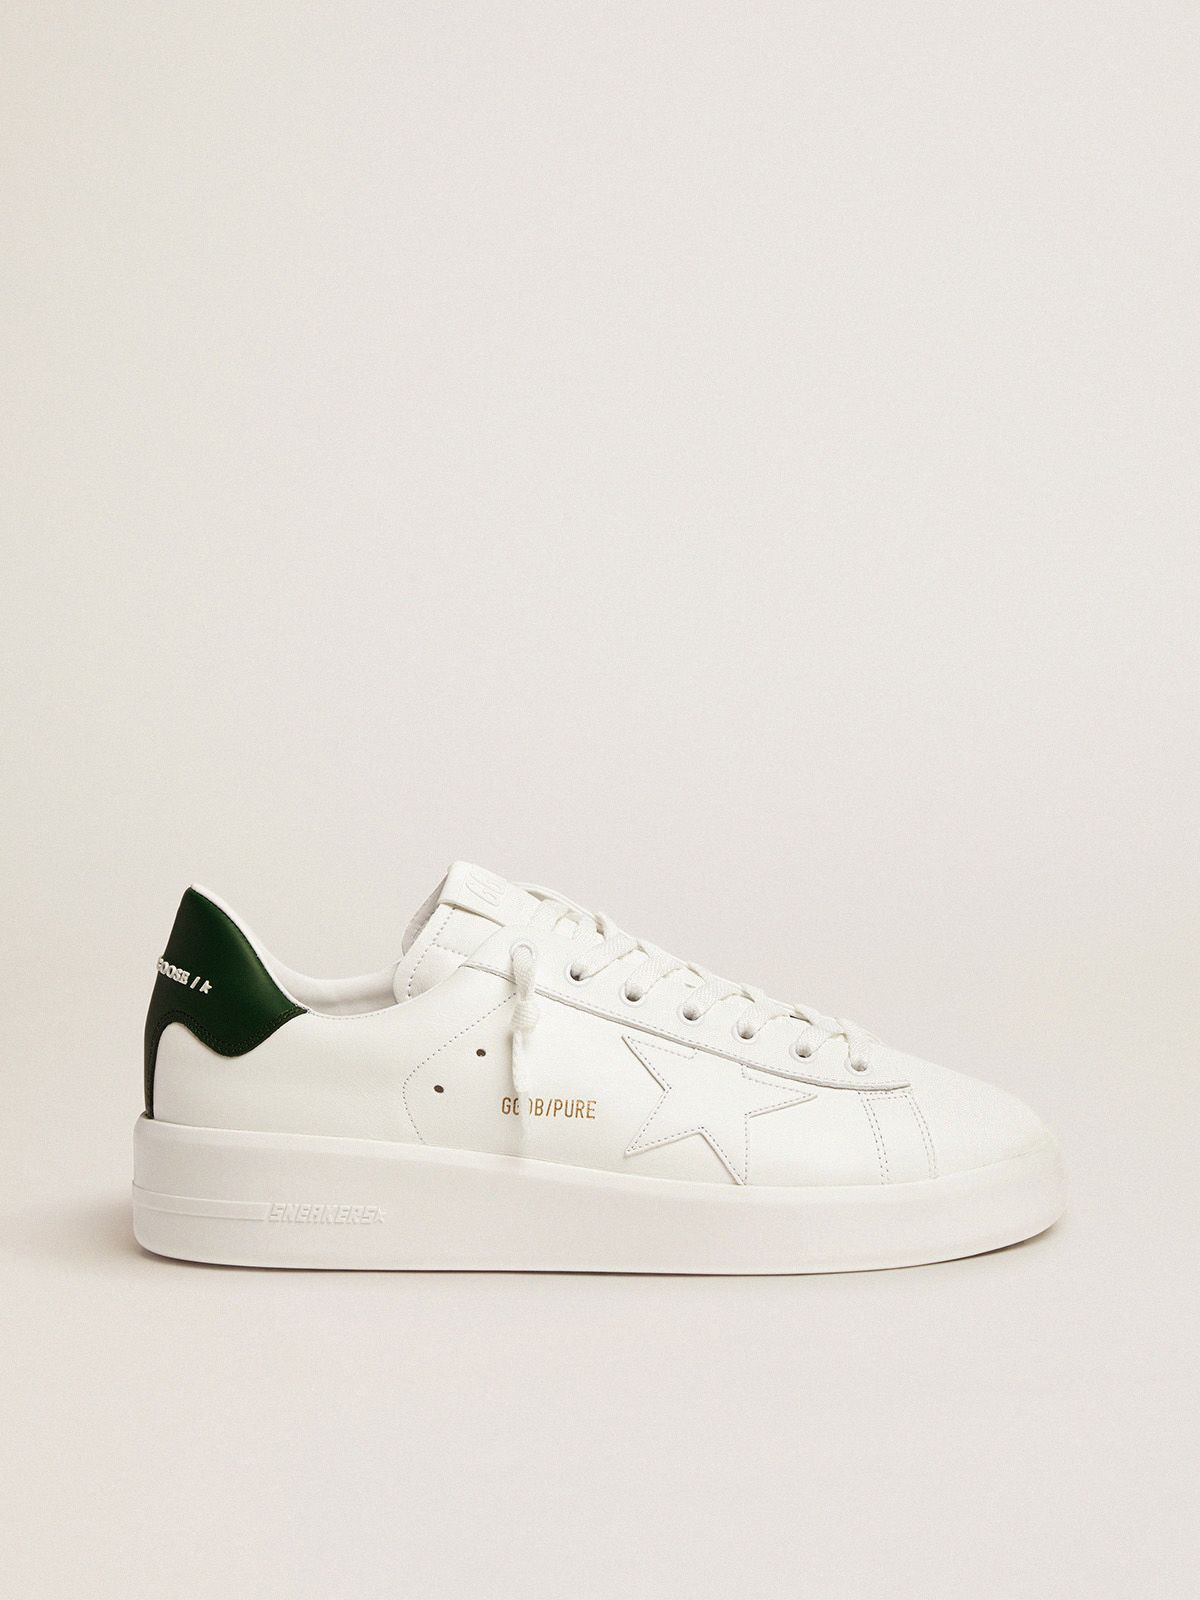 White Purestar sneakers with green heel tab